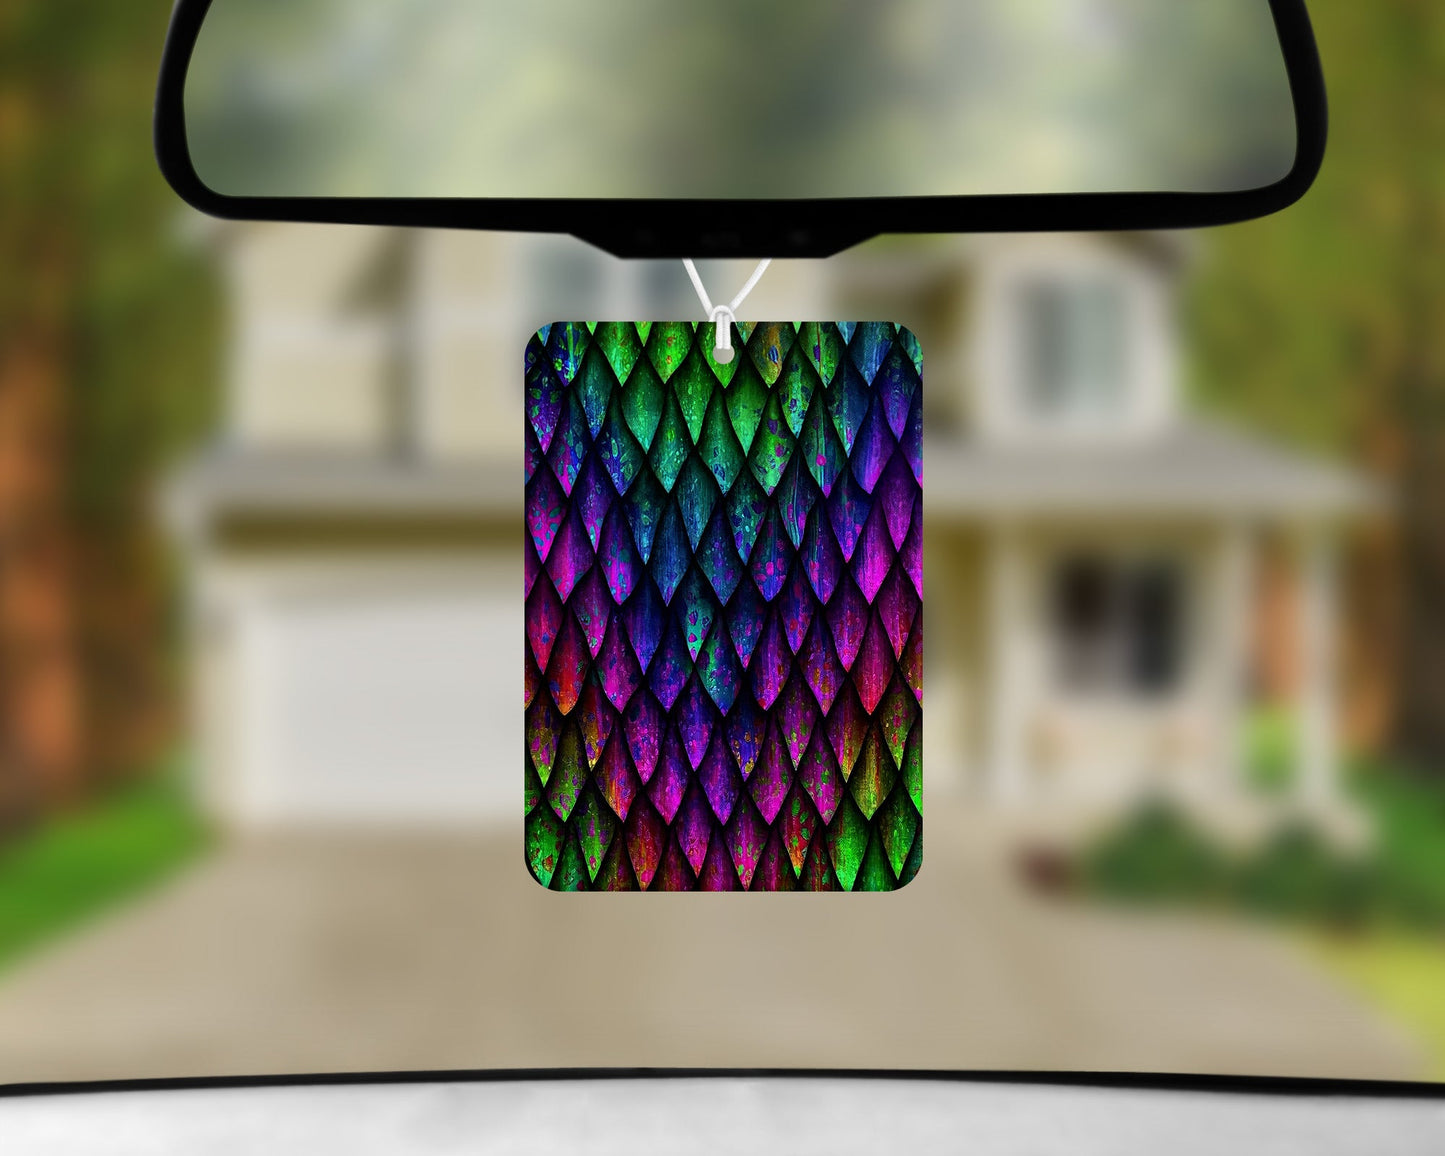 Dragon Scales|Freshie|Includes Scent Bottle - Vehicle Air Freshener